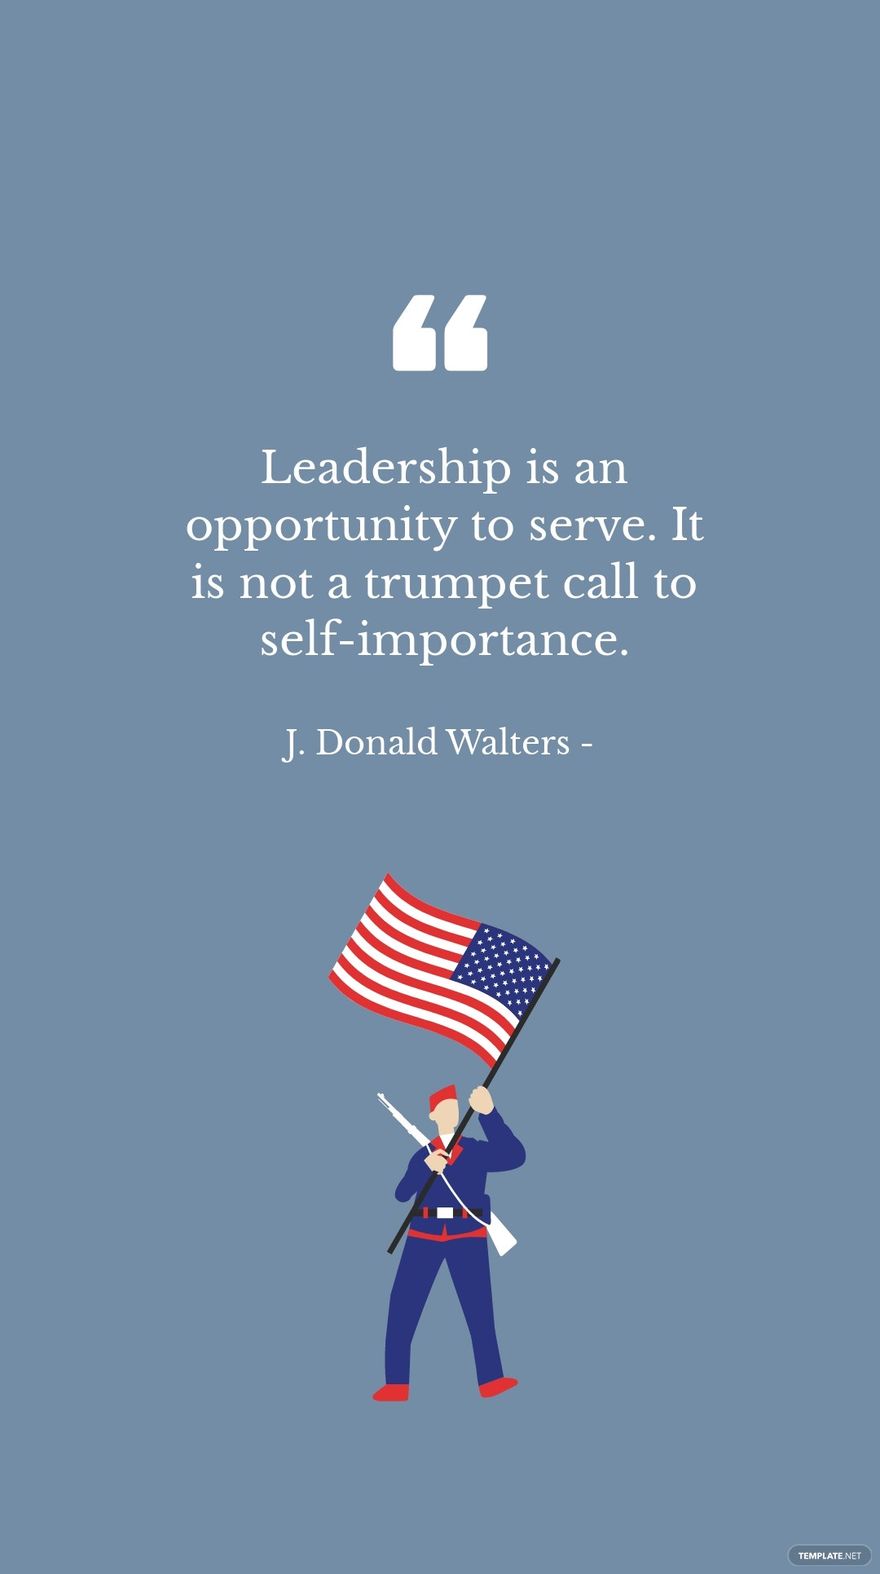 J. Donald Walters - Leadership is an opportunity to serve. It is not a trumpet call to self-importance. in JPG